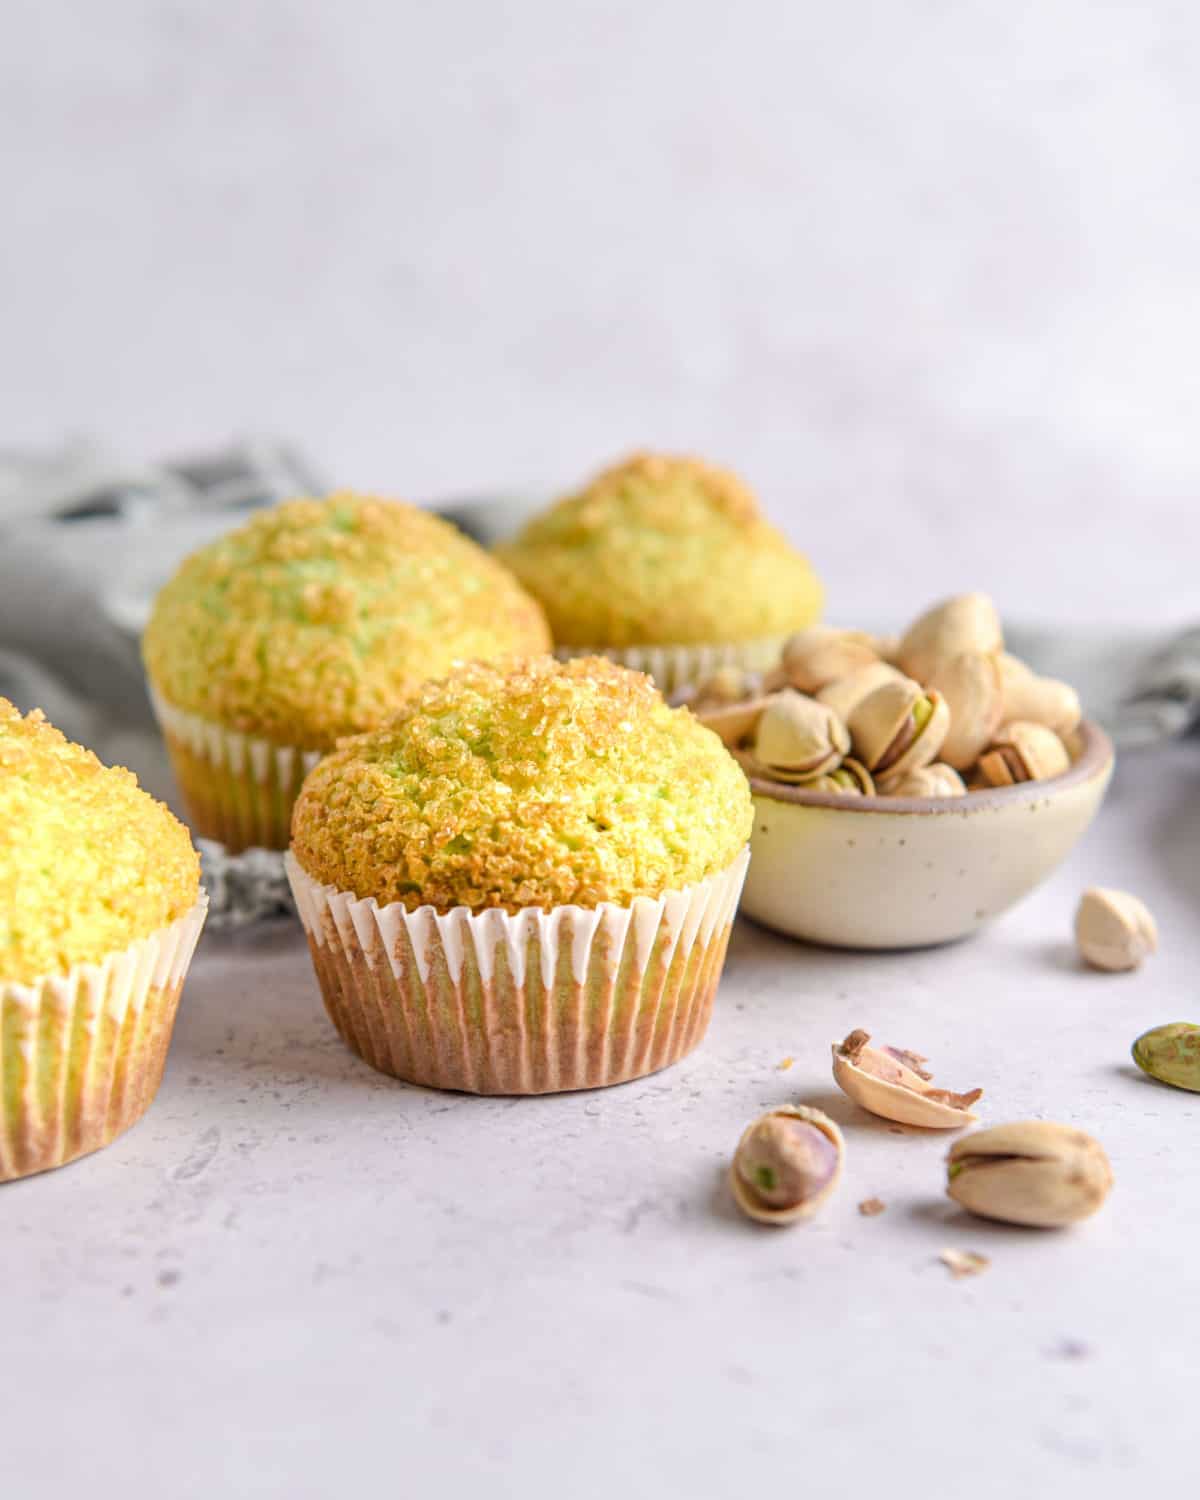 Muffins with pistachios on a table.